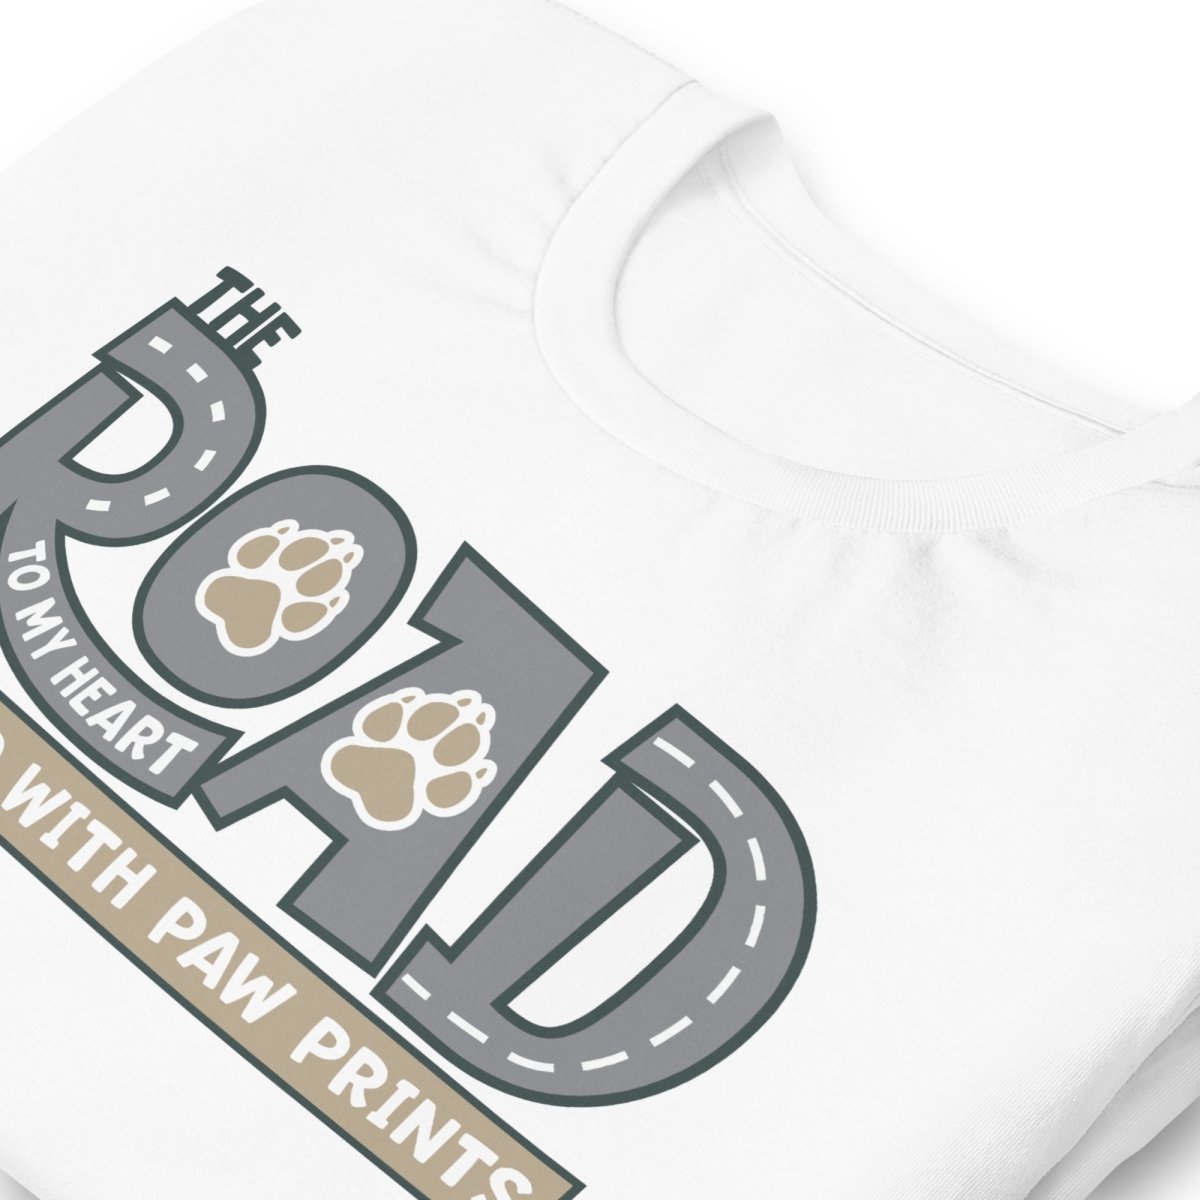 The Road to My Heart Paws T-Shirt - DoggyLoveandMore